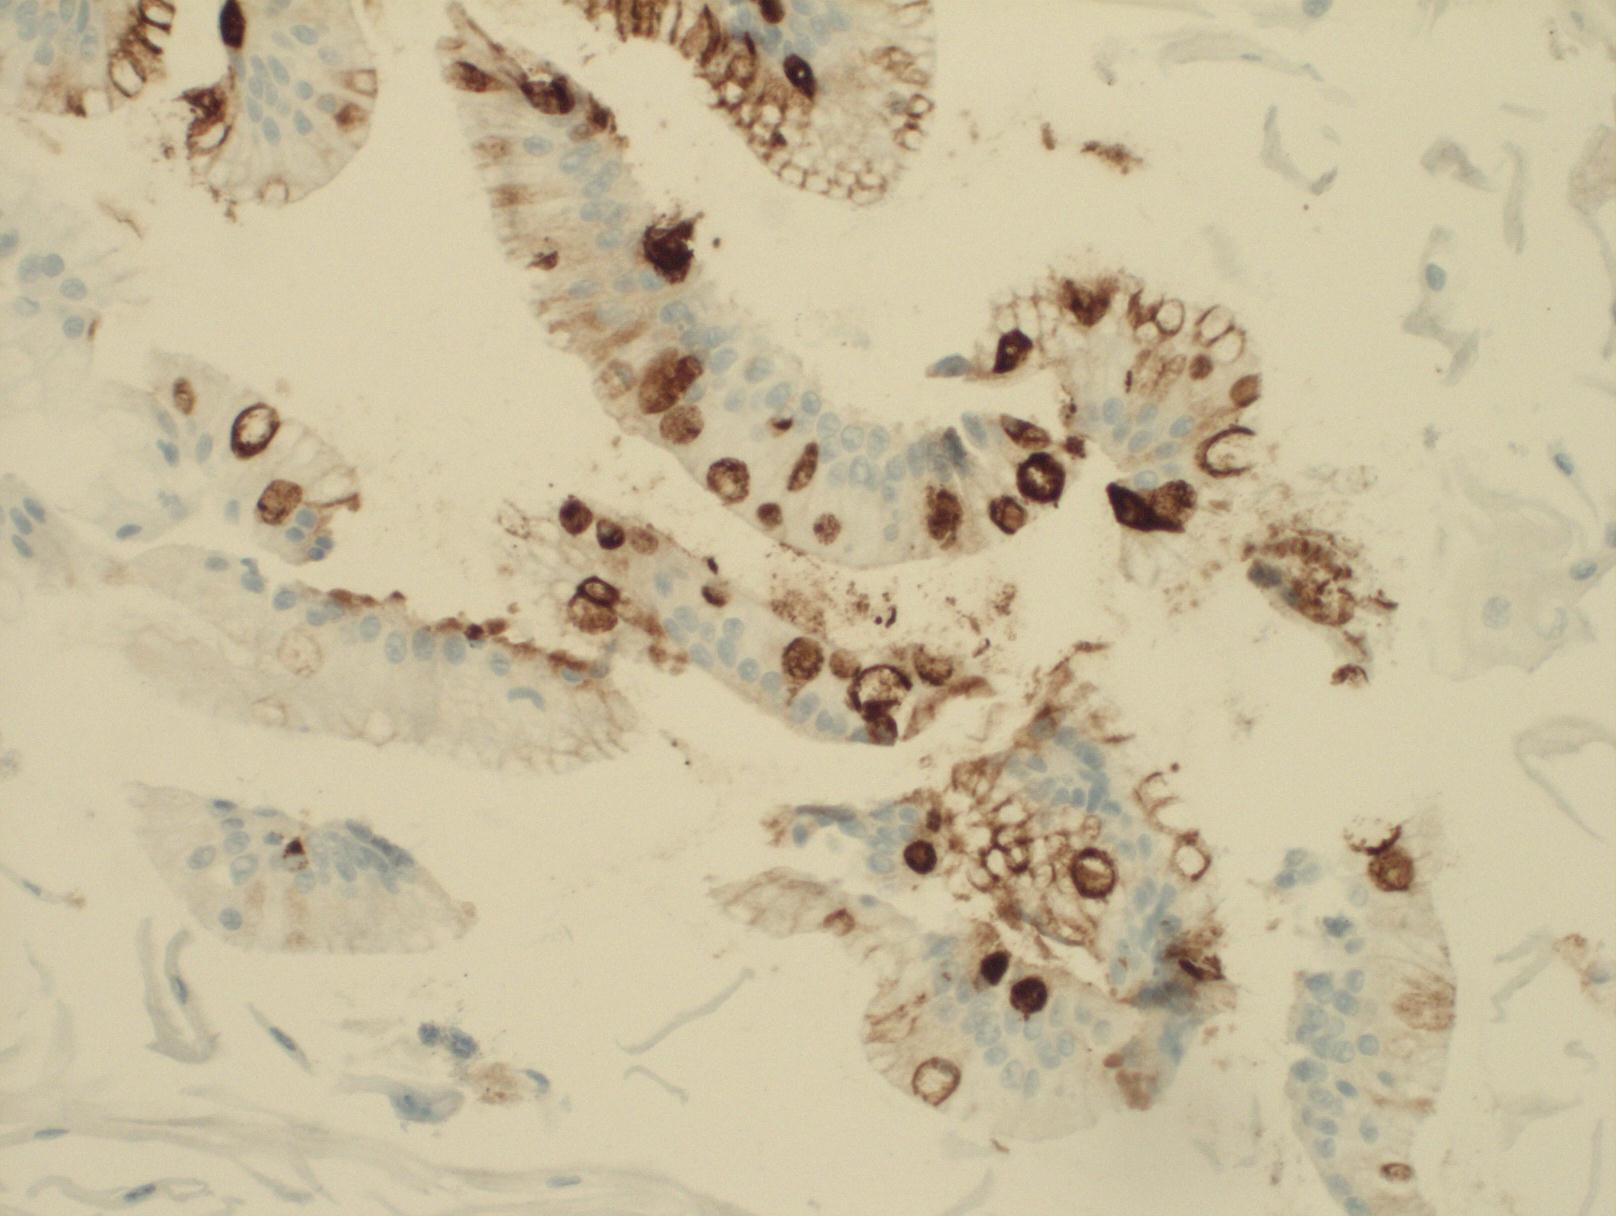 Cells sampled from the oesophagus - those stained brown have the biomarker TFF3 indicating Barrett's oesophagus